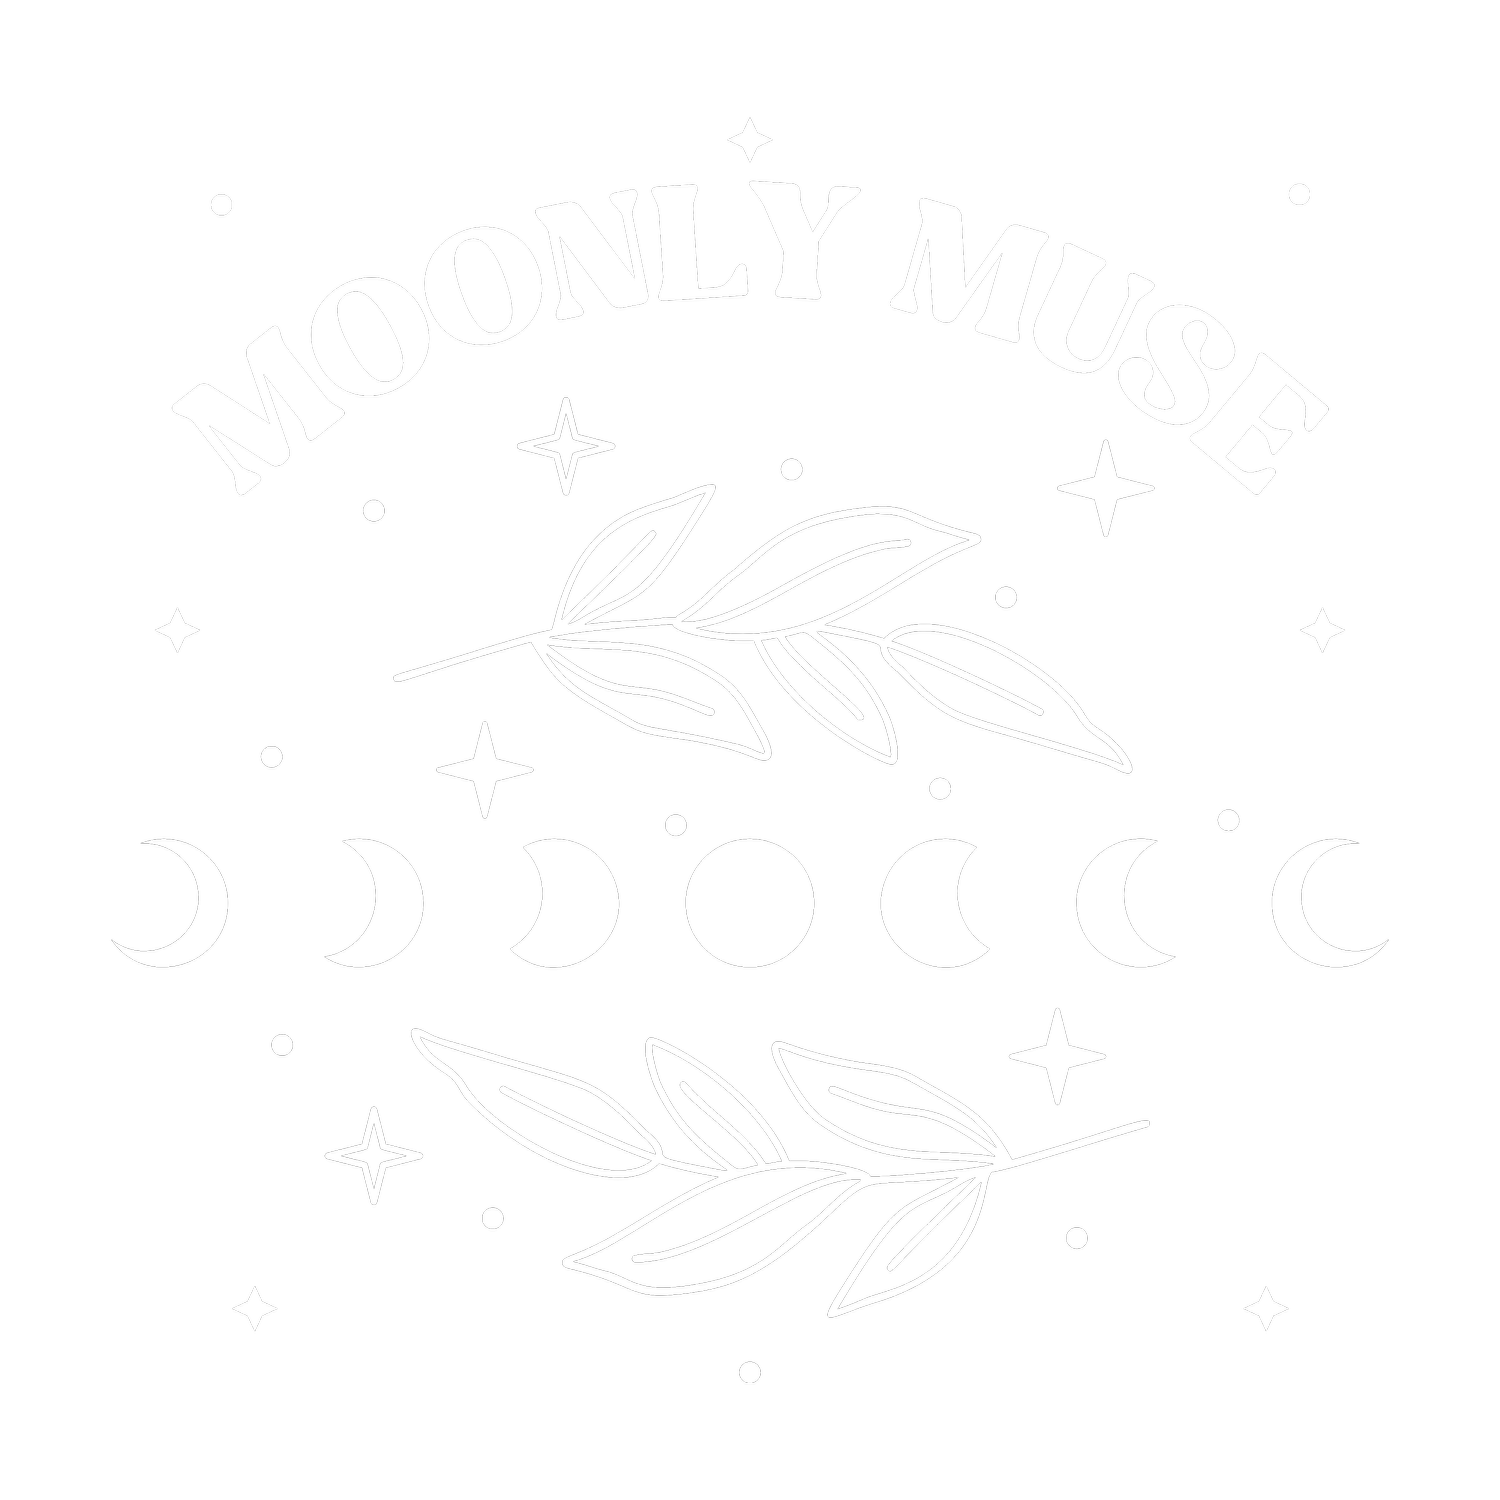 Moonly Muse